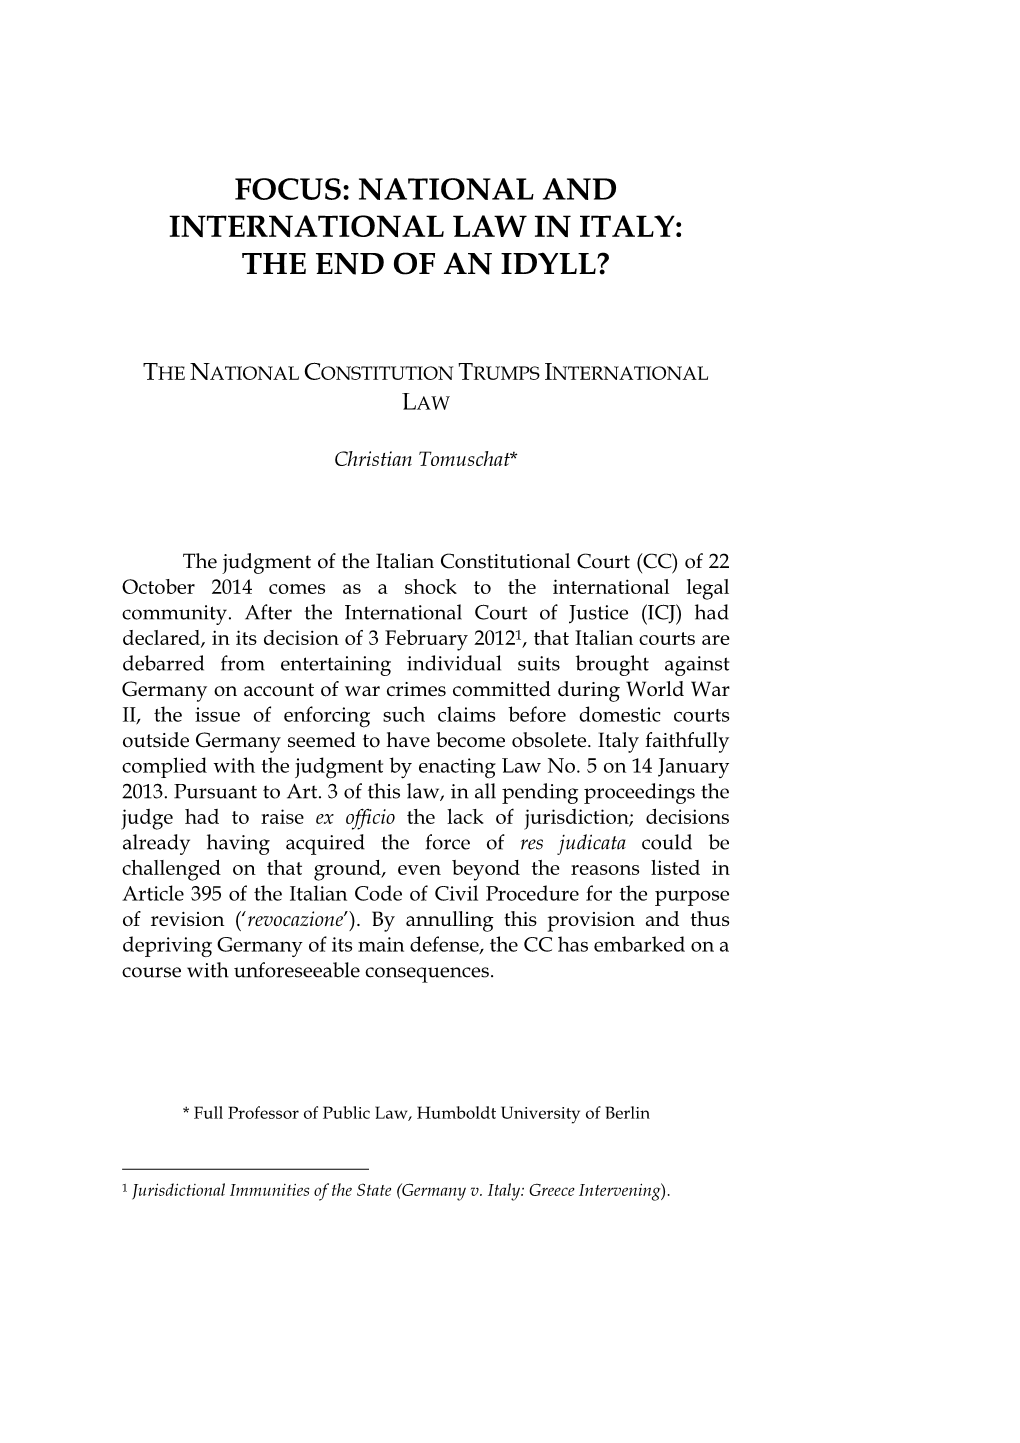 National and International Law in Italy: the End of an Idyll?